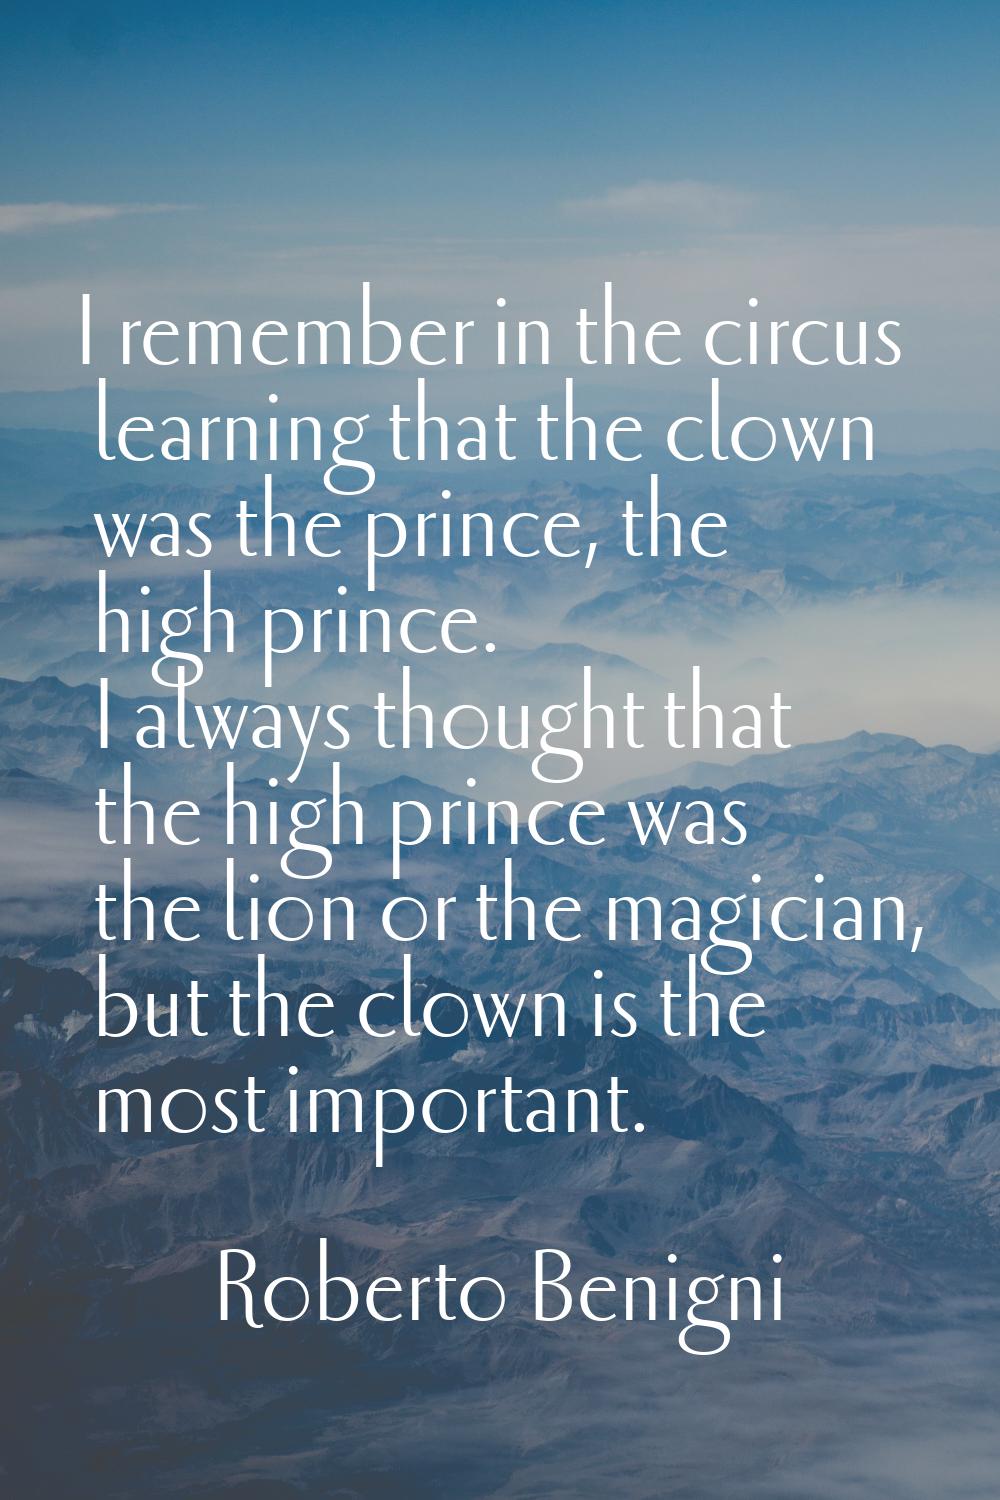 I remember in the circus learning that the clown was the prince, the high prince. I always thought 